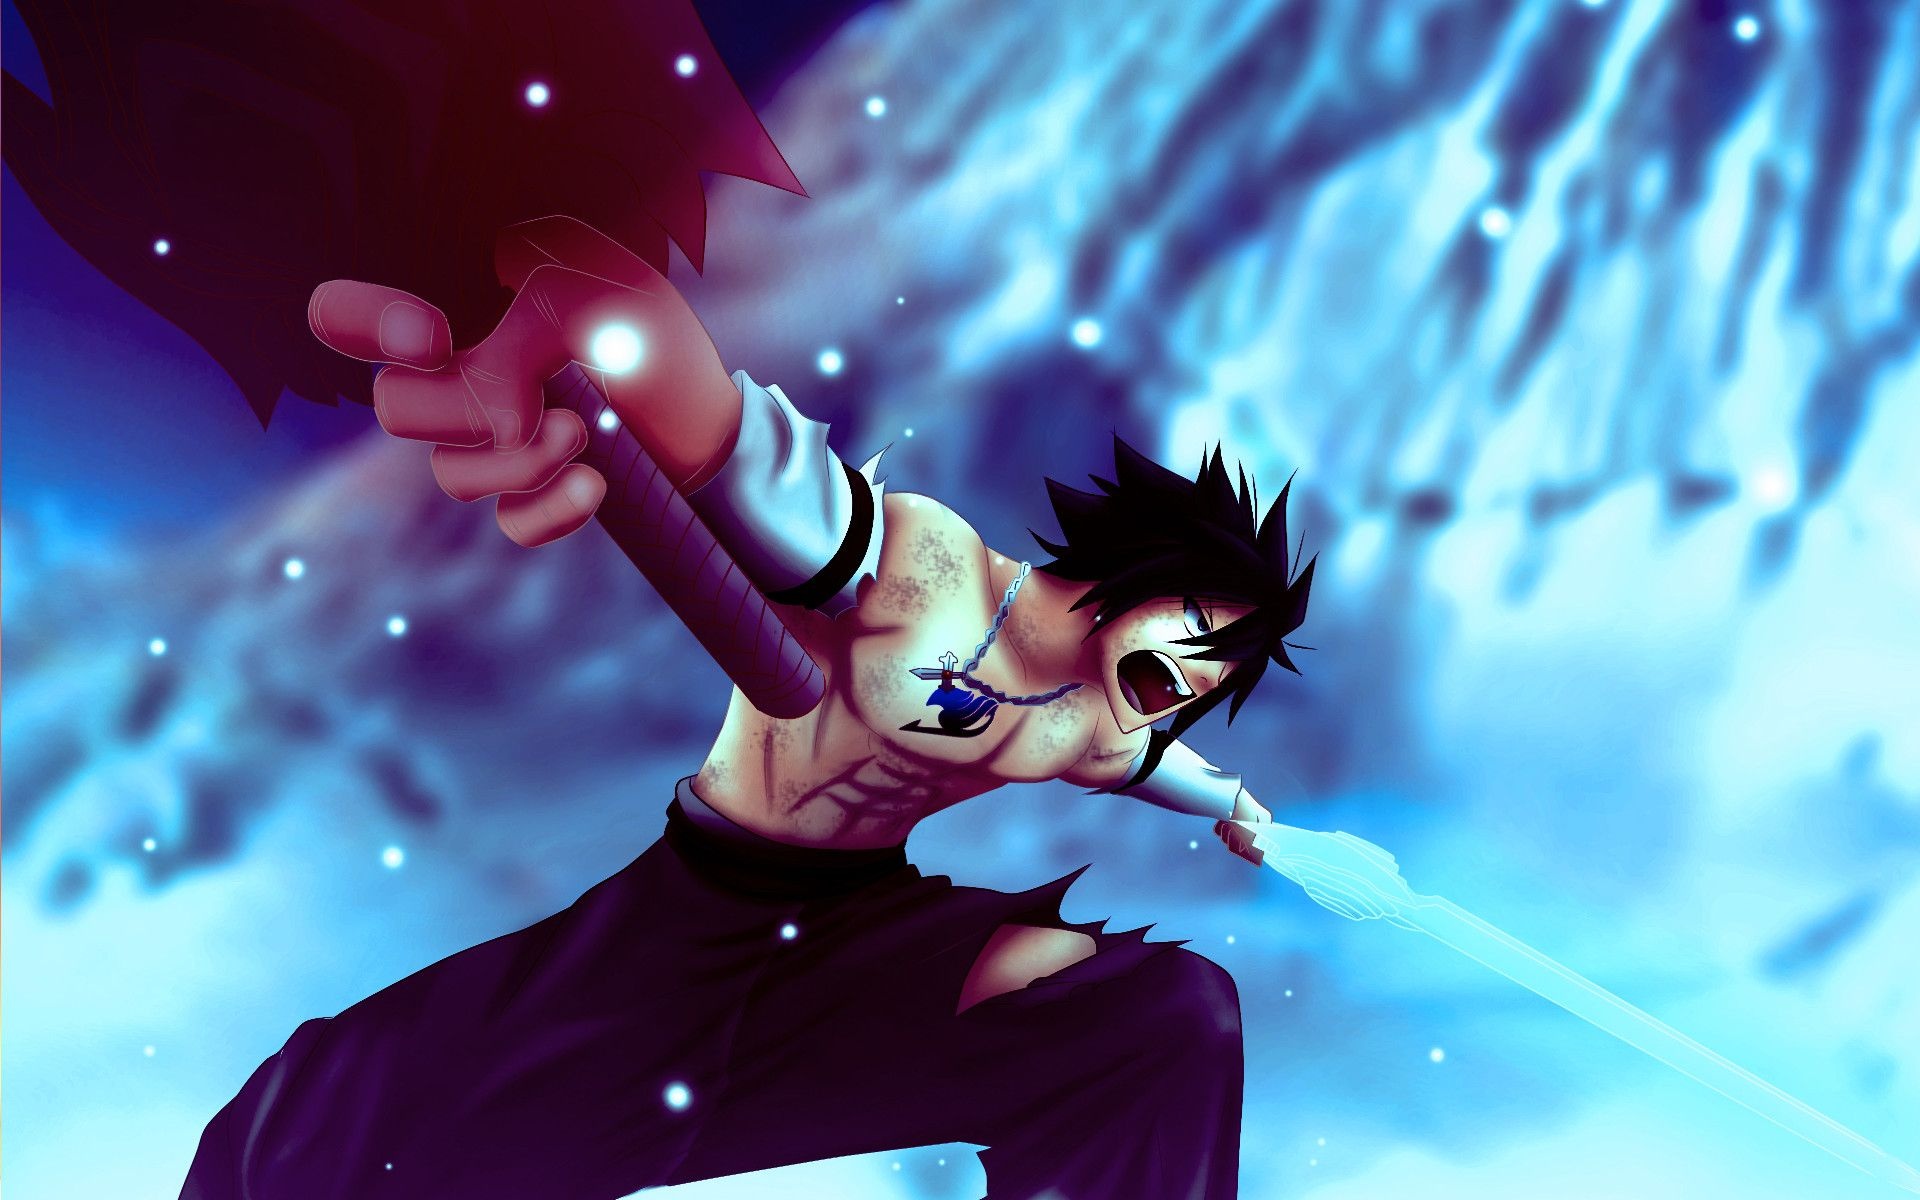 Gray Fullbuster: Ice-Make Unlimited: One Sided Chaotic Dance, Anime series Fairy Tail by Hiro Mashima. 1920x1200 HD Background.